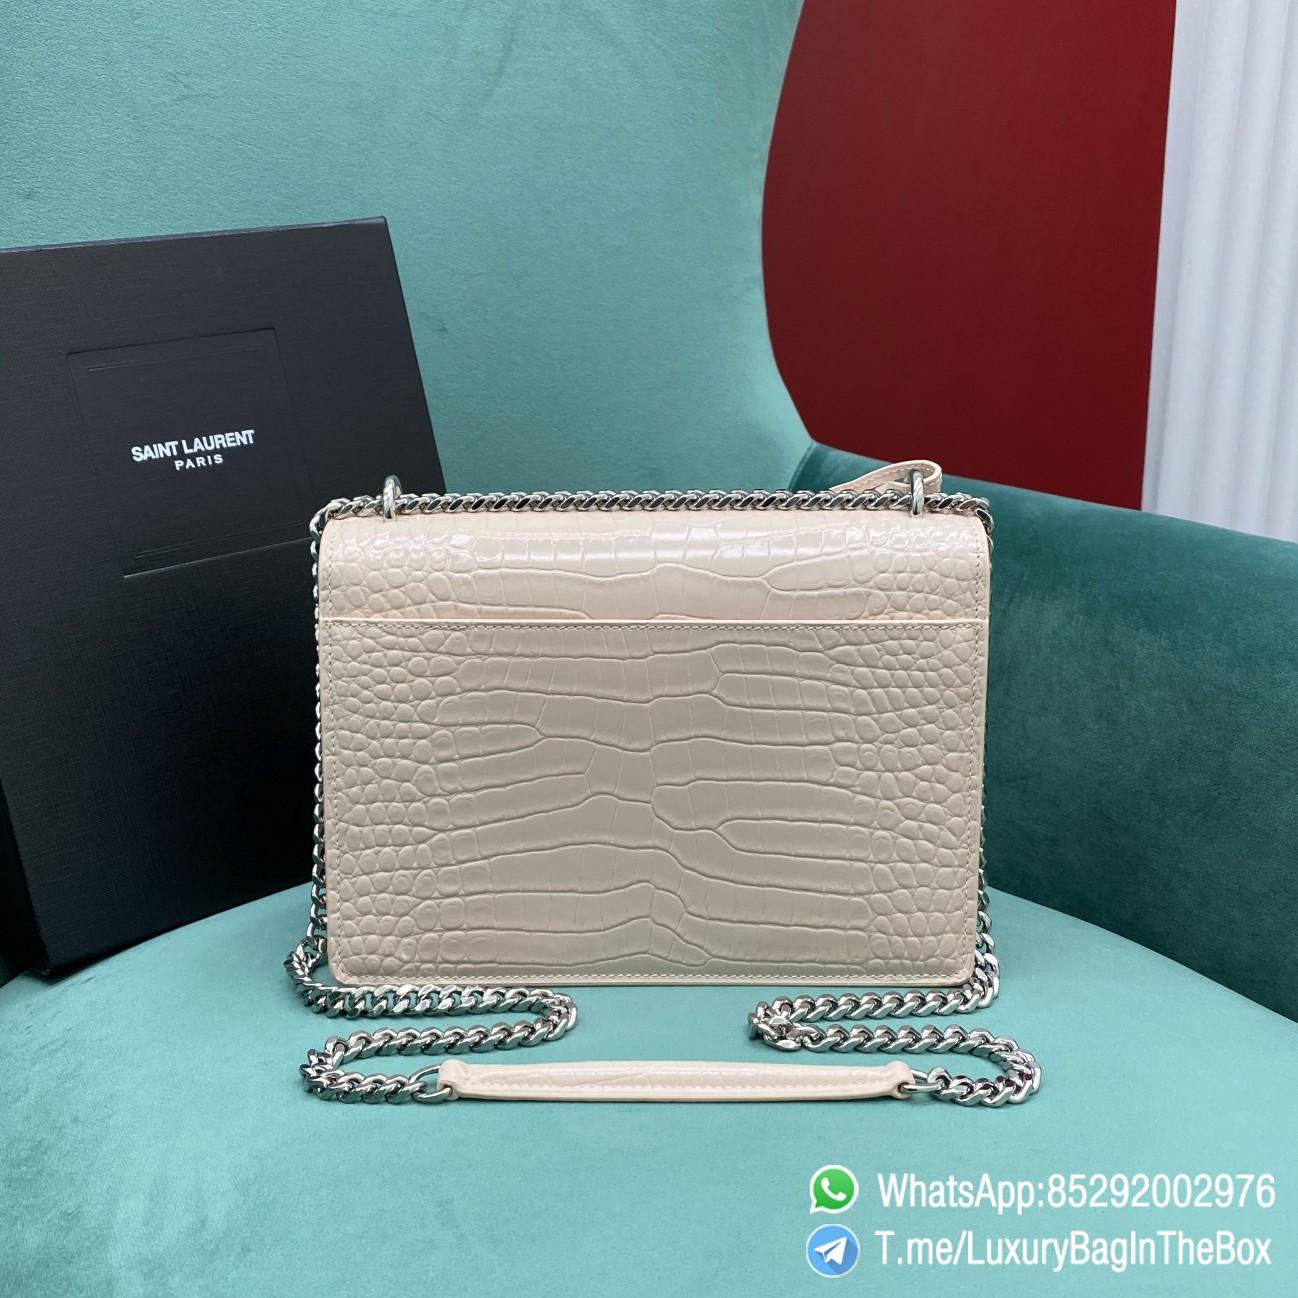 Best Replica YSL Sunset Bag Blanc Vintage Crocodile Embossed Leather with Front Flap Chain and Leather Shoulder Strap Silver Metal Hardware and YSL Initials SKU 442906DND0N9207 03 1